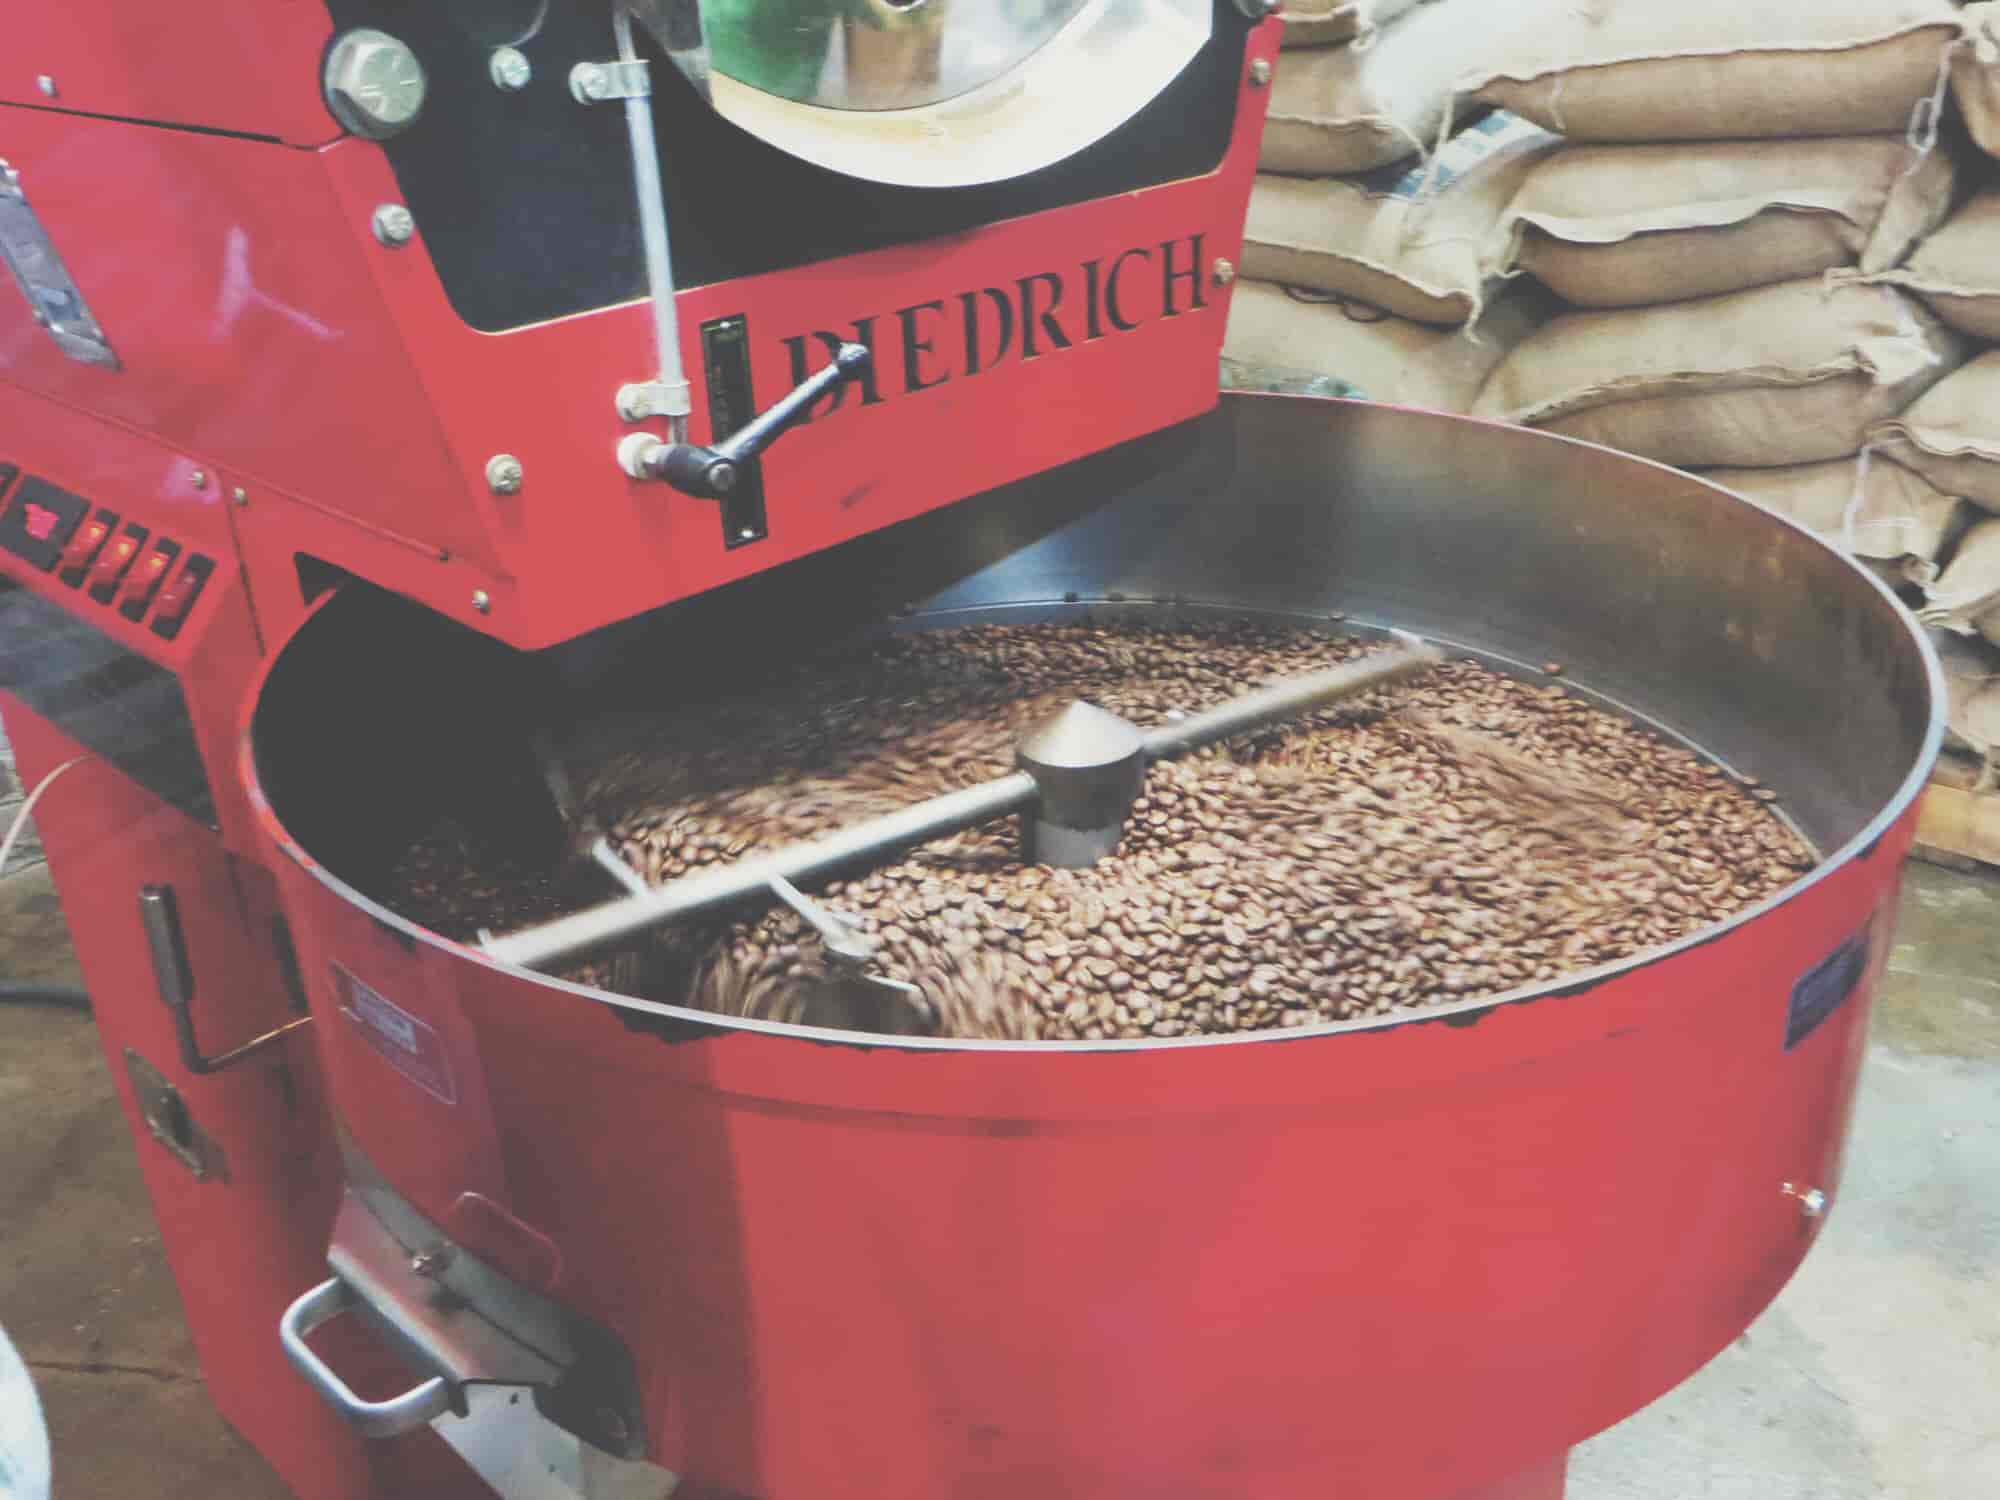 A Look At Our History through the Roasters We’ve Used